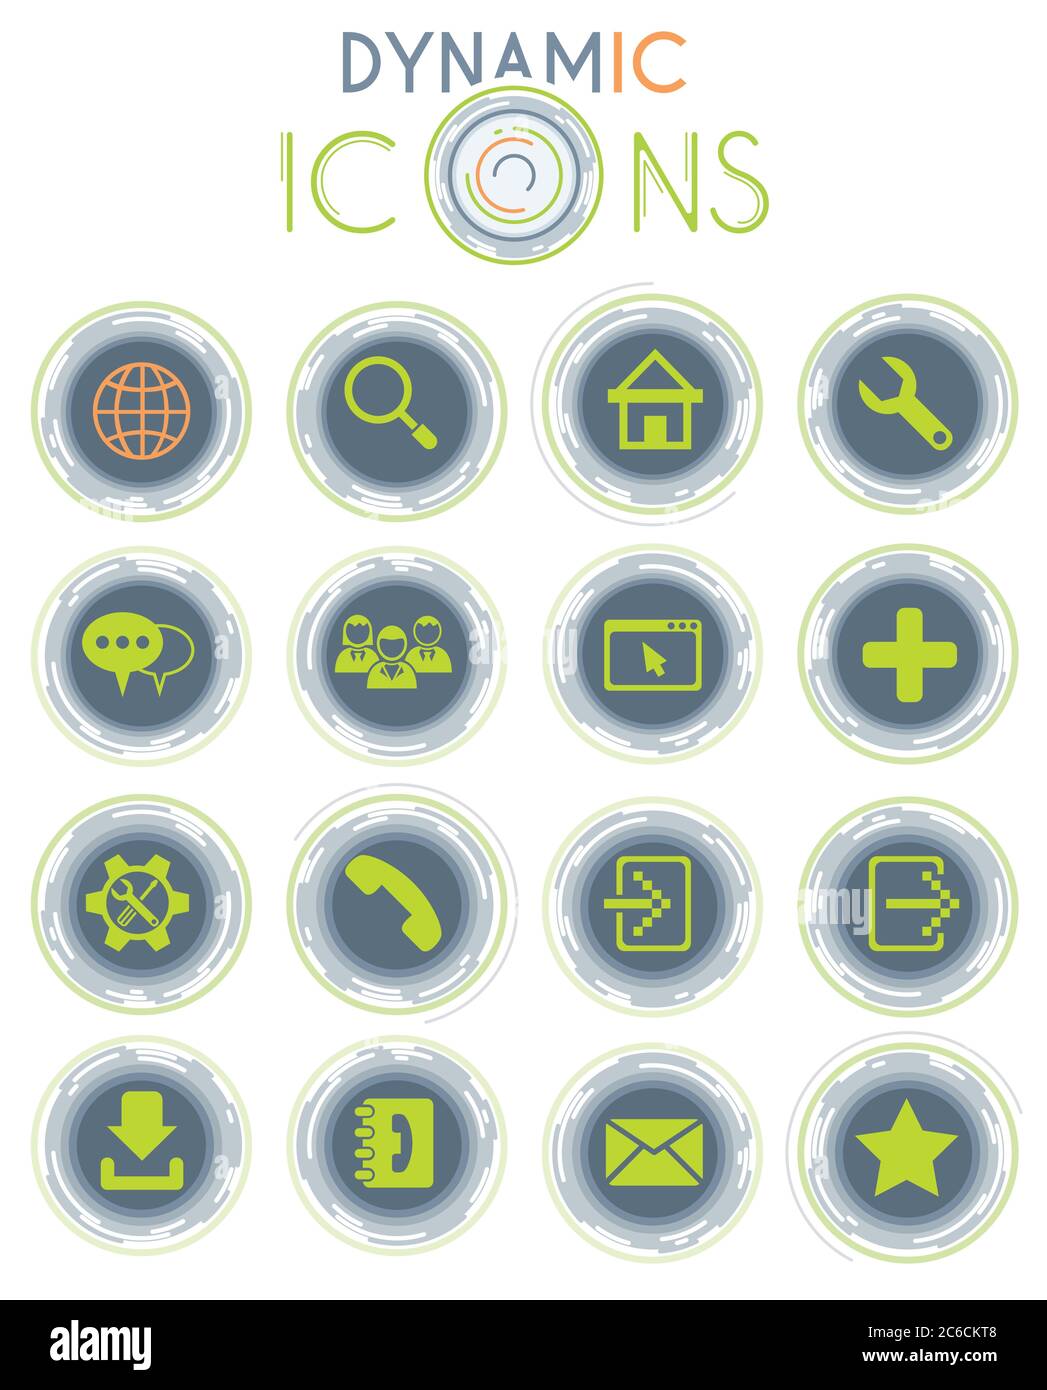 web tools dynamic icons Stock Vector